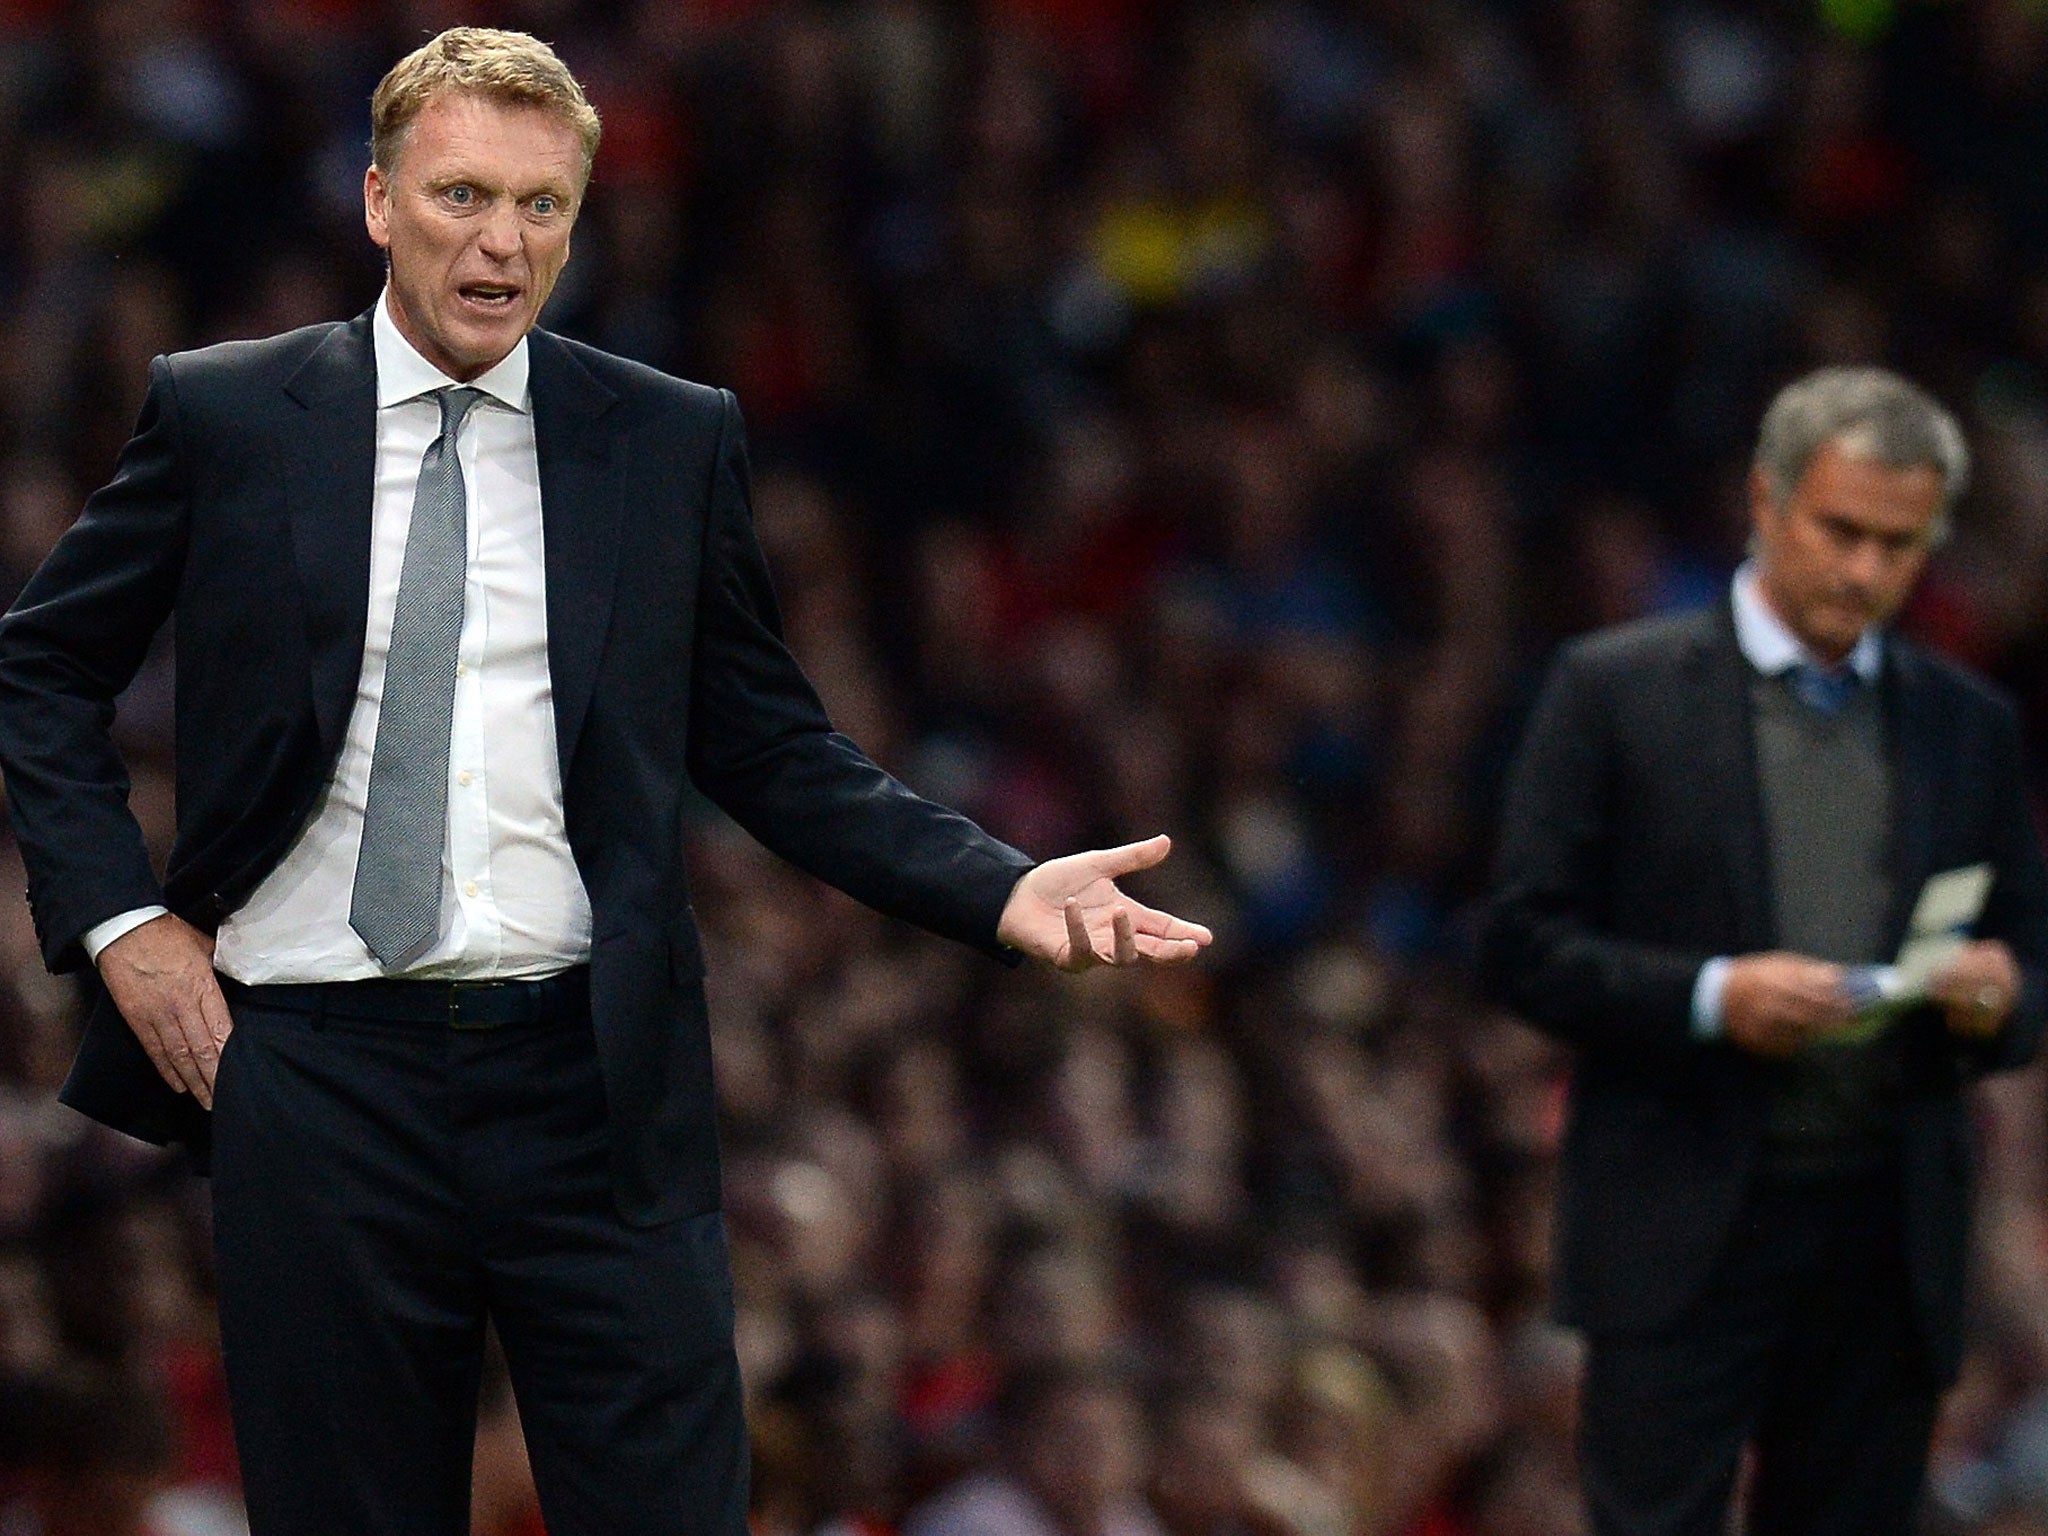 David Moyes (left) prowls the technical area last night as Jose Mourinho takes notes